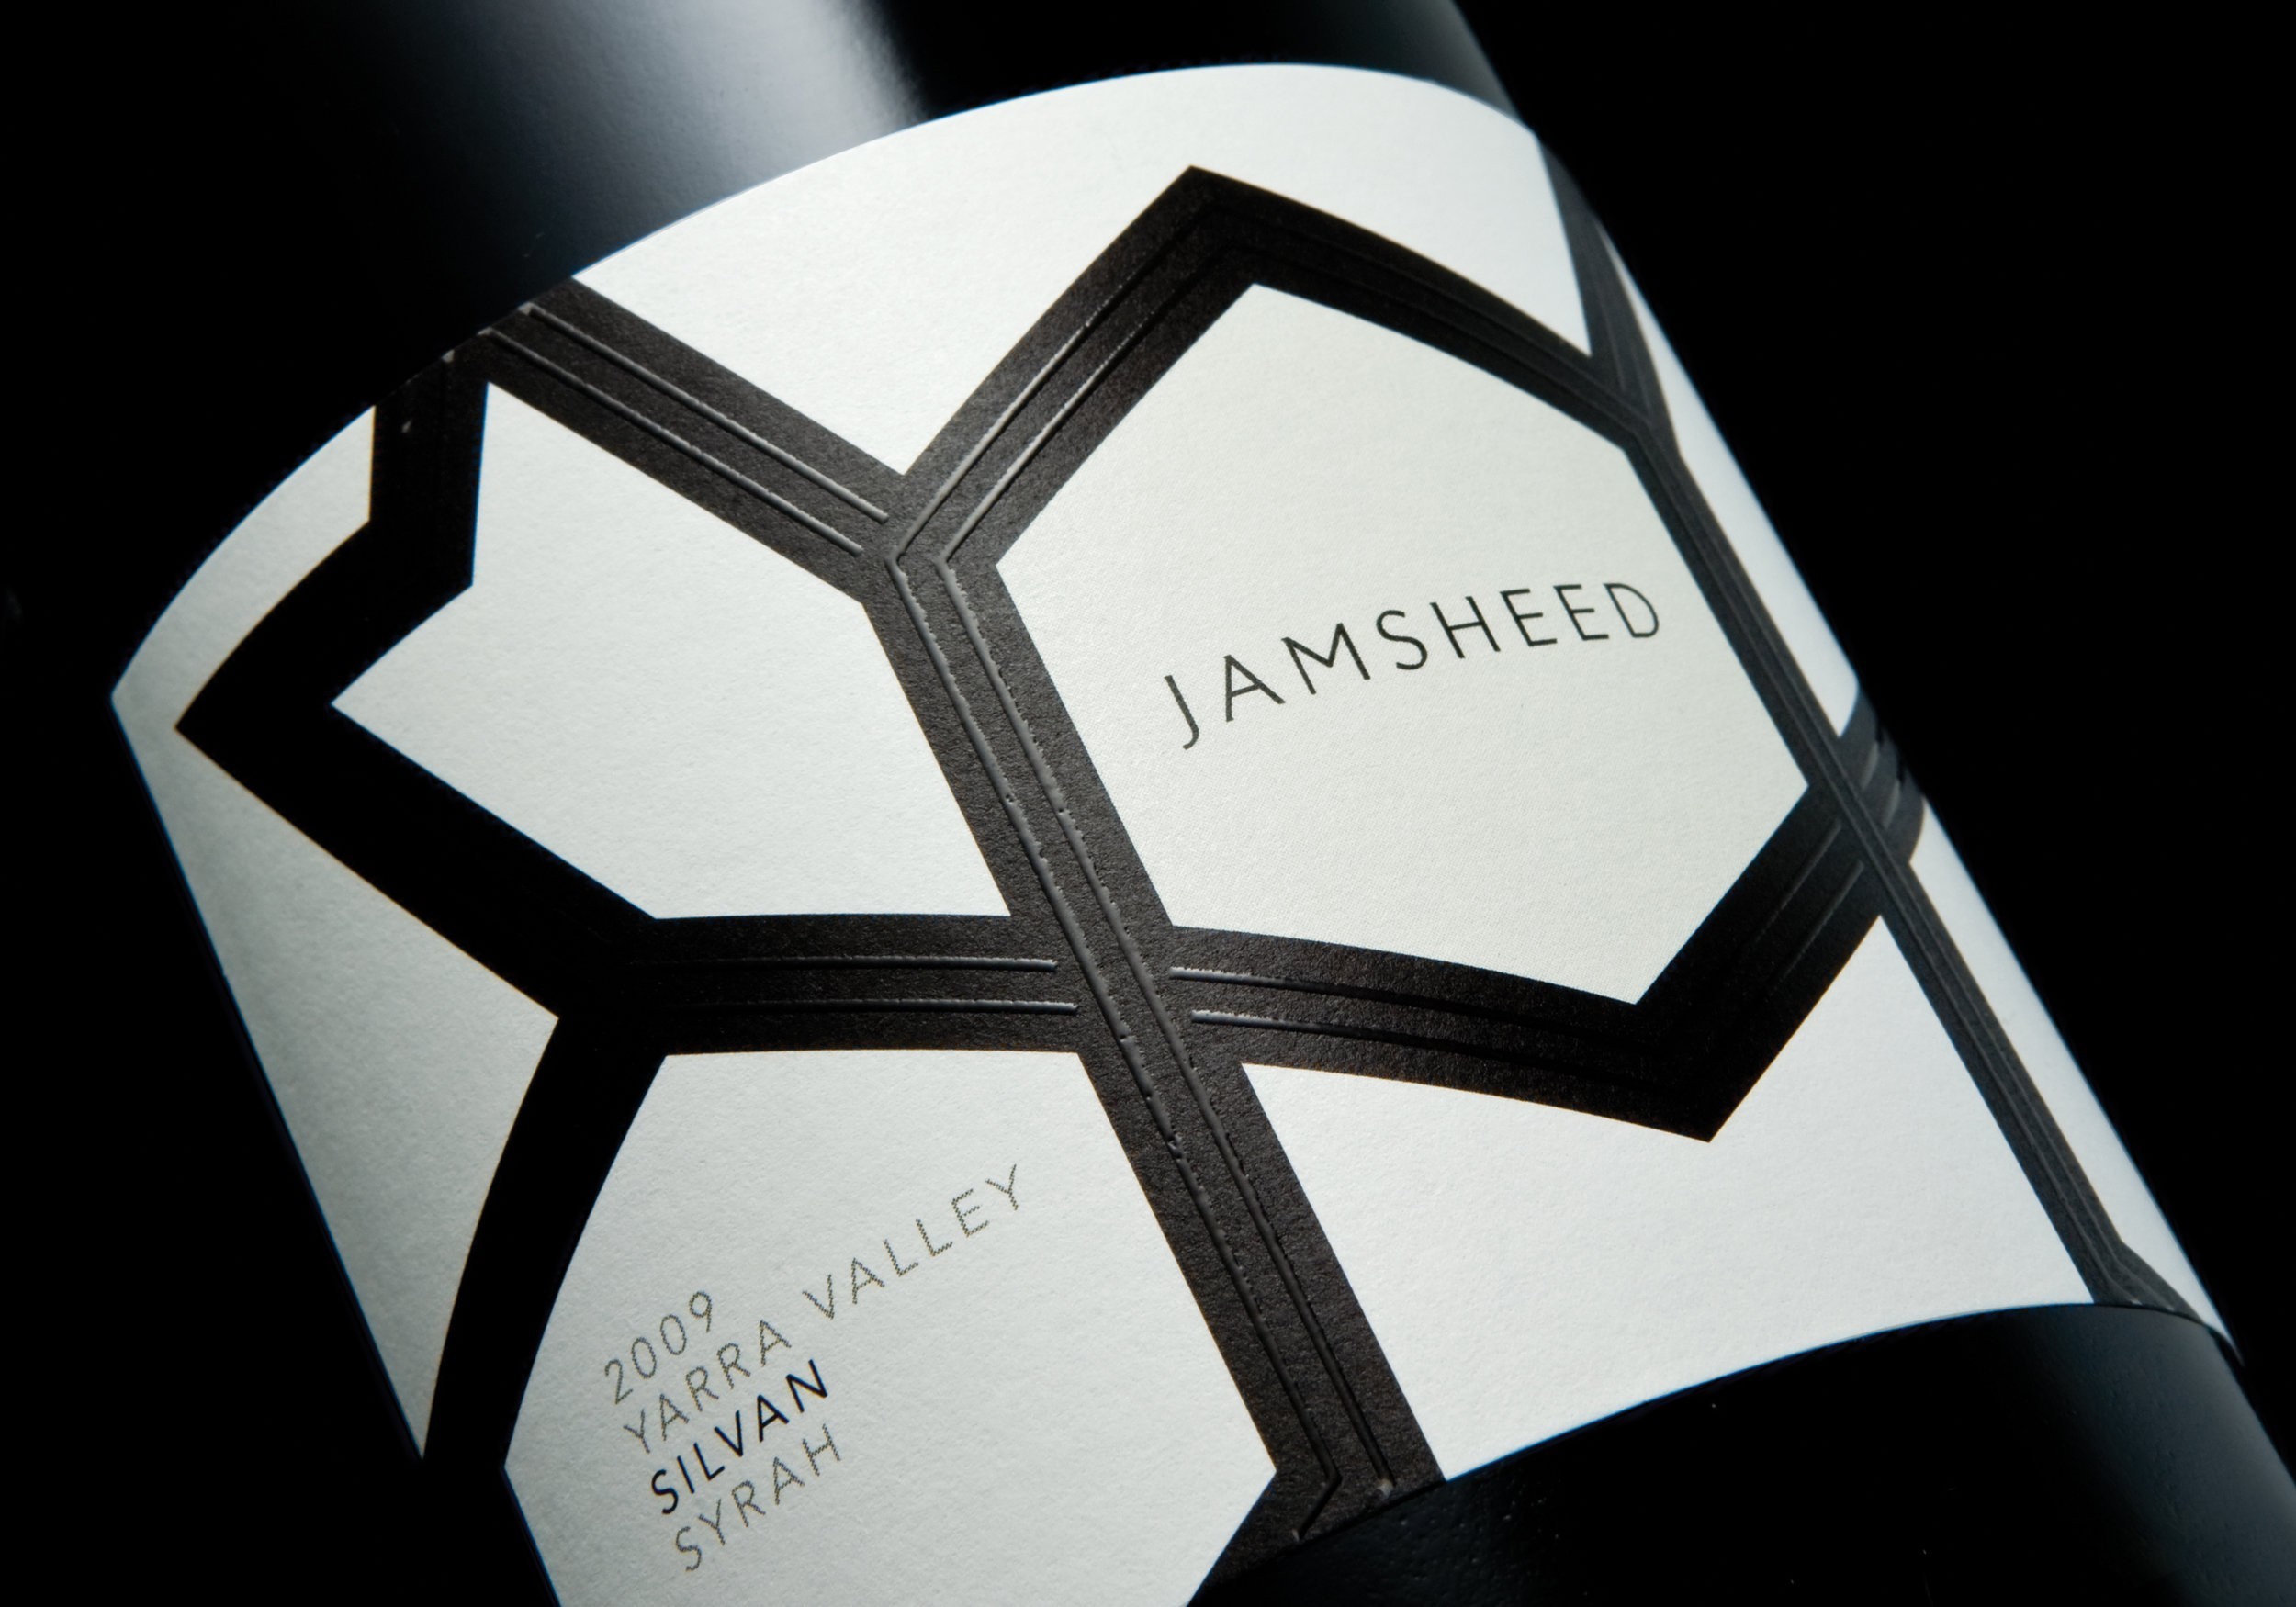 Striking Abstract Persian Patterns Designs for Wine Label Range